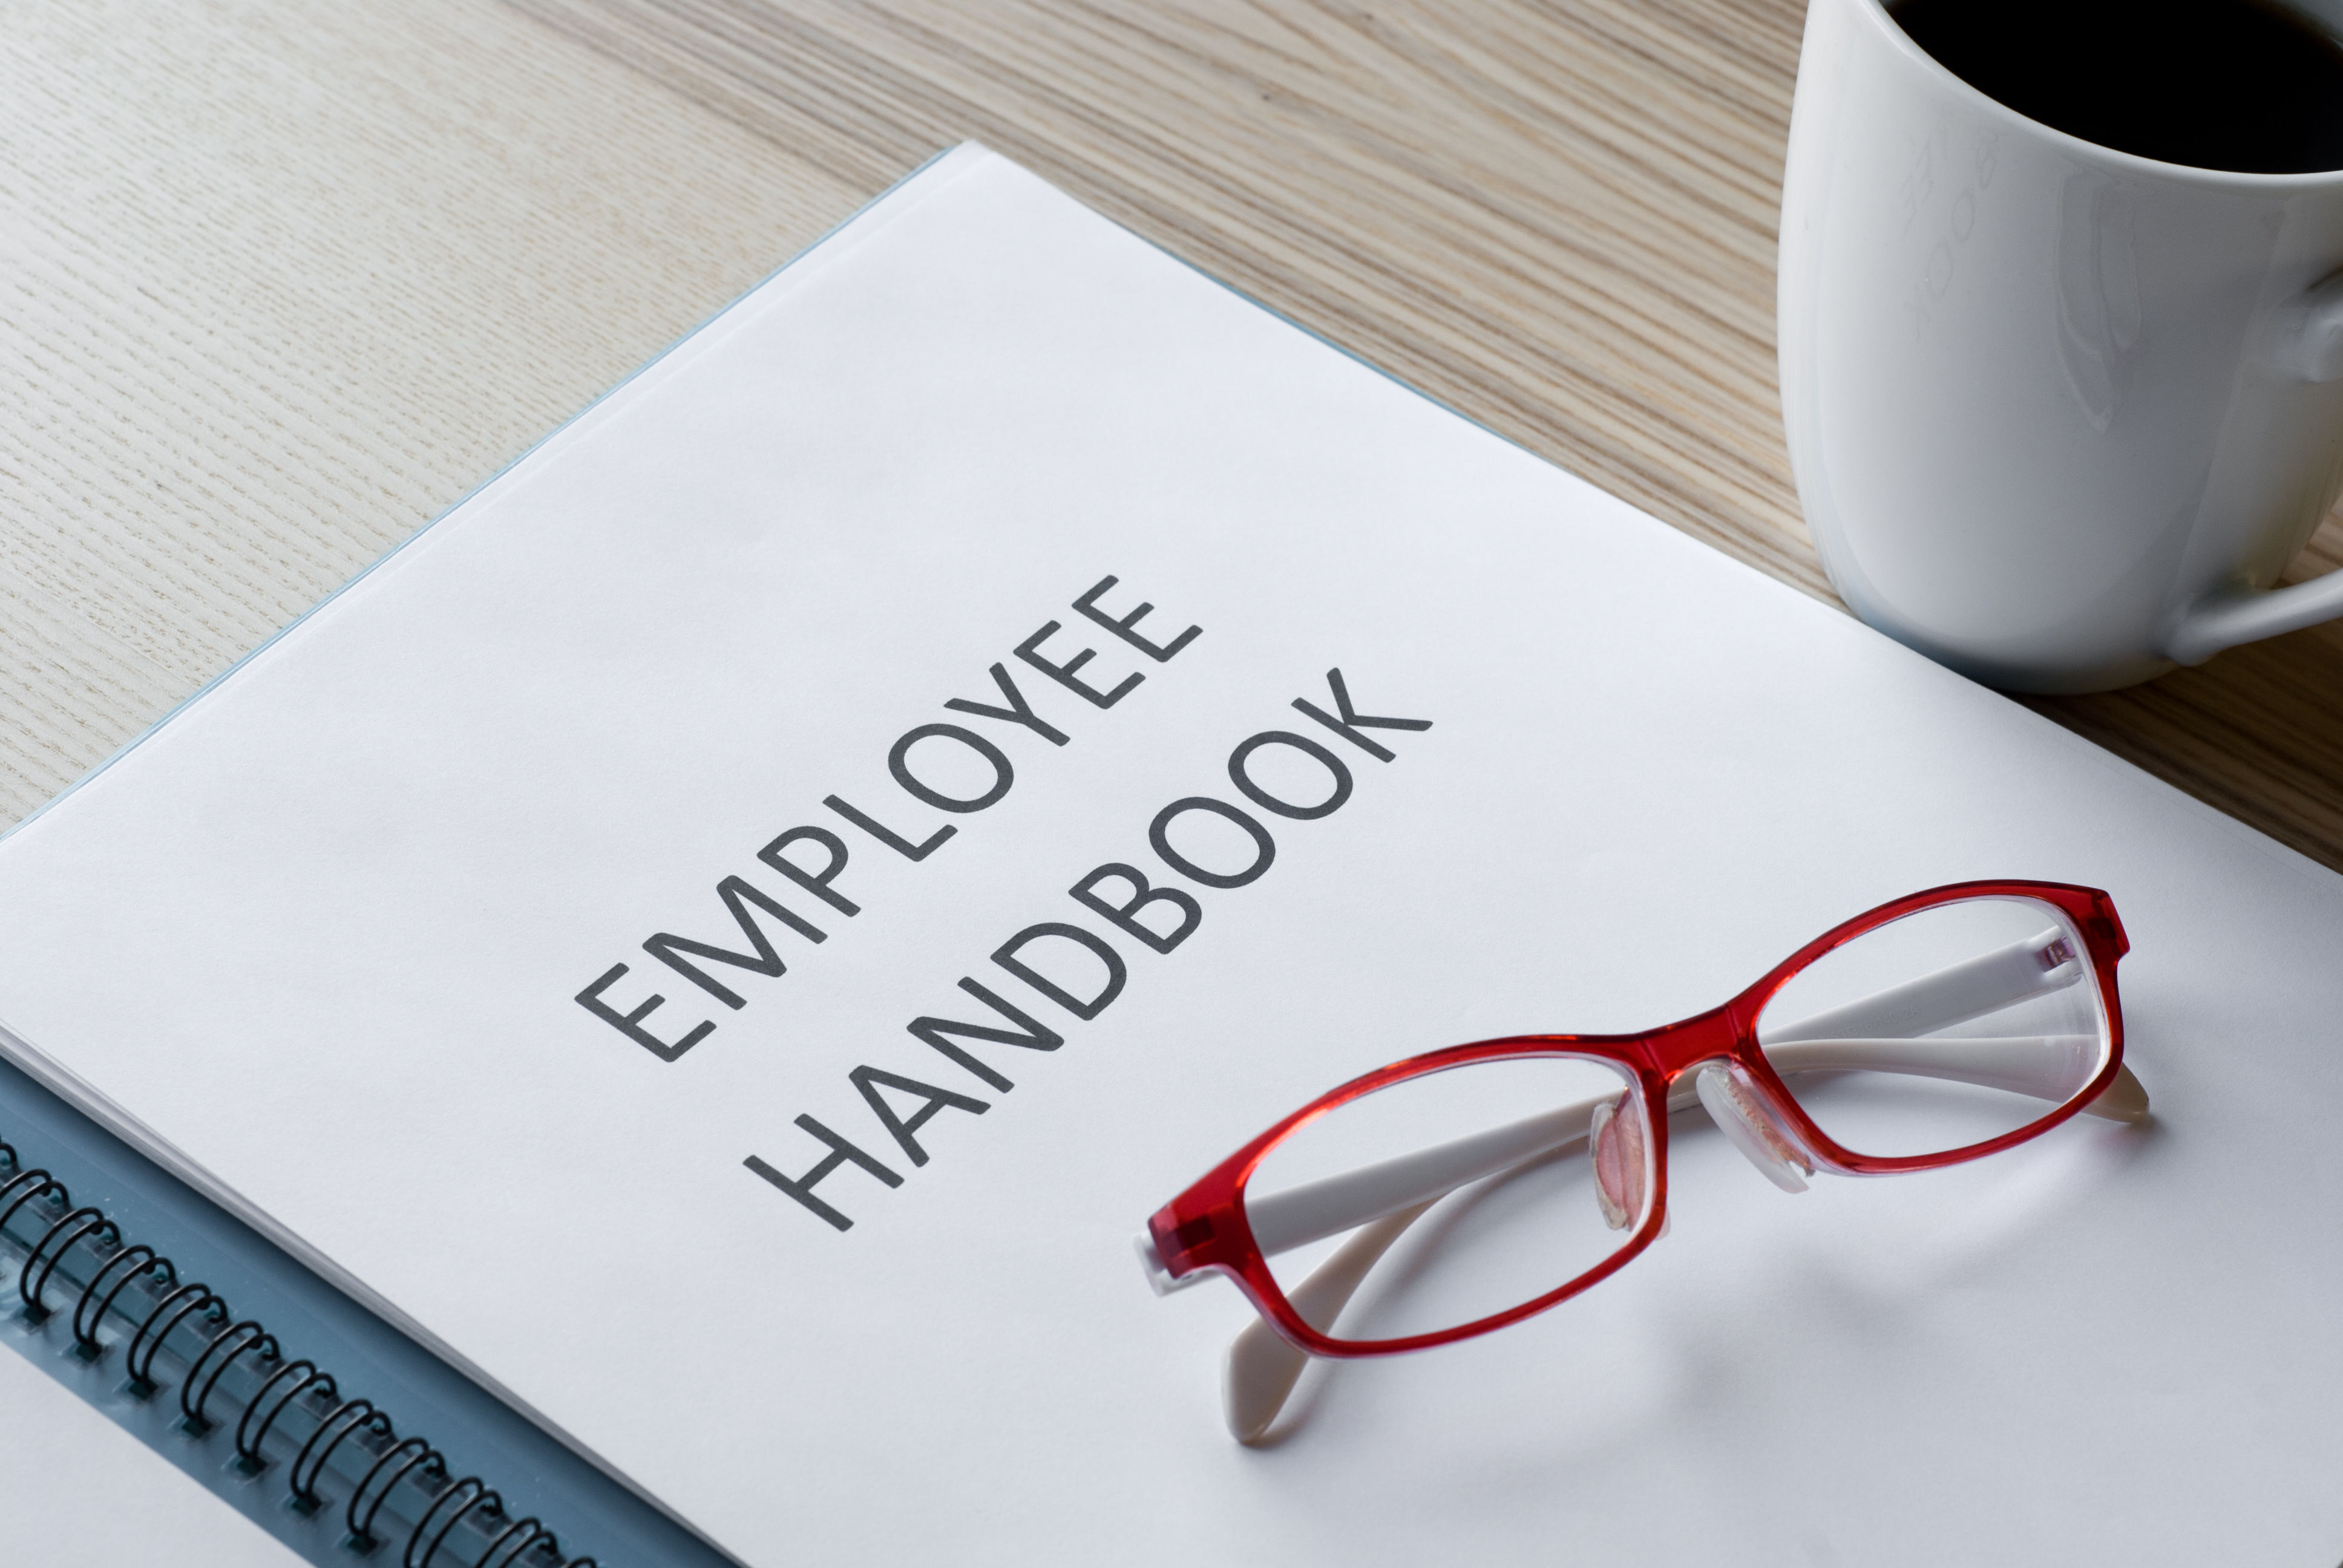 Employee Handbooks: How to Write One and Why It’s Important